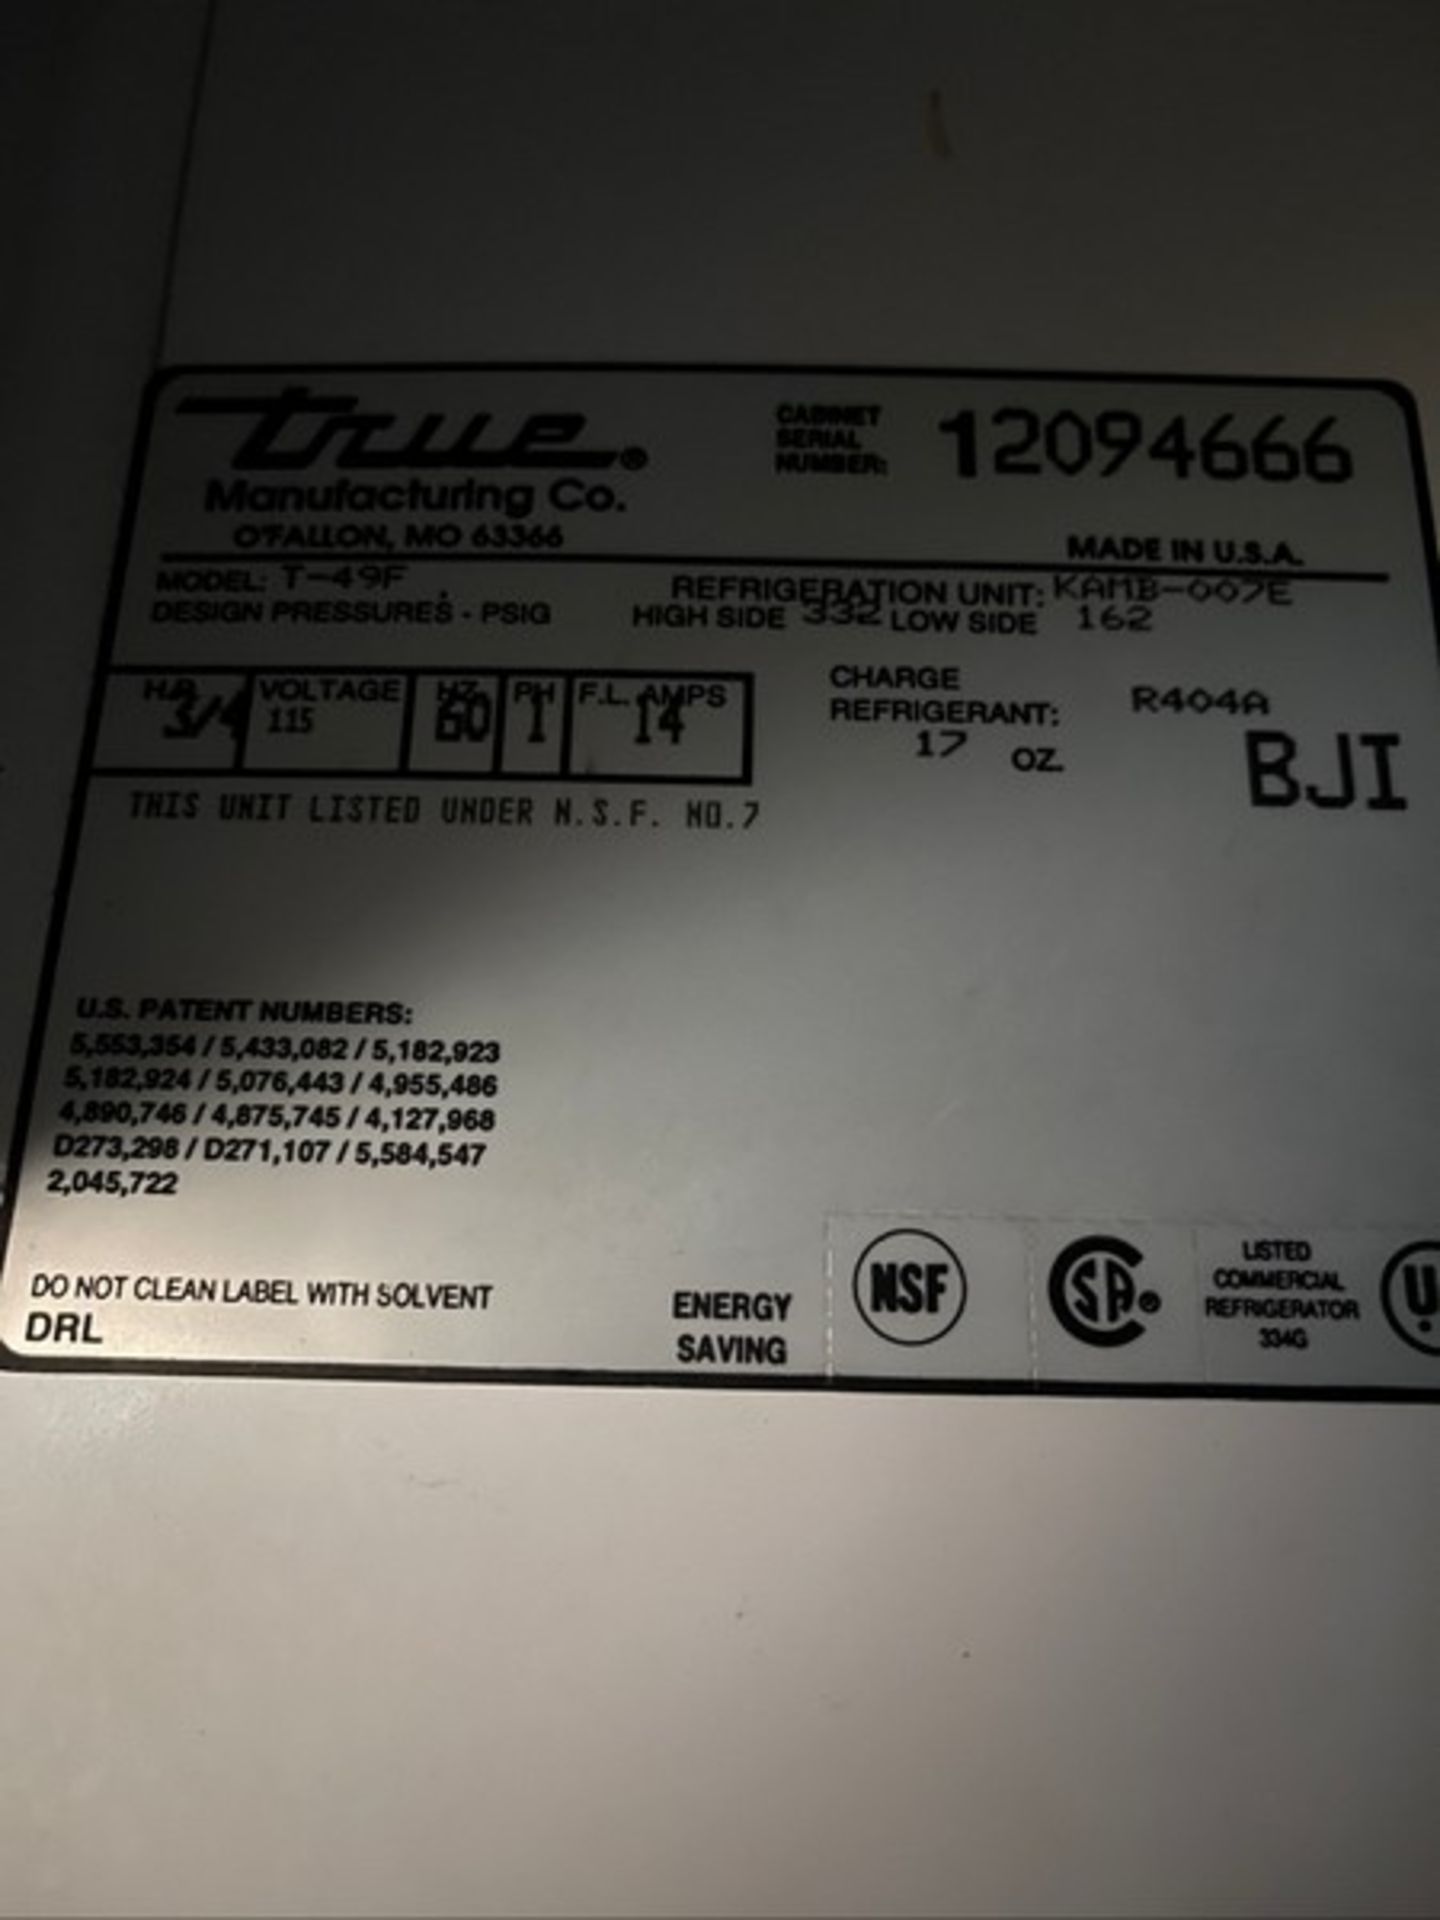 TRUE MANUFACTURING 2-DOOR S/S FREEZER, MODEL T-49F, S/N 12094666, 115 V, 1 PHASE(INV#80362)( - Image 3 of 3